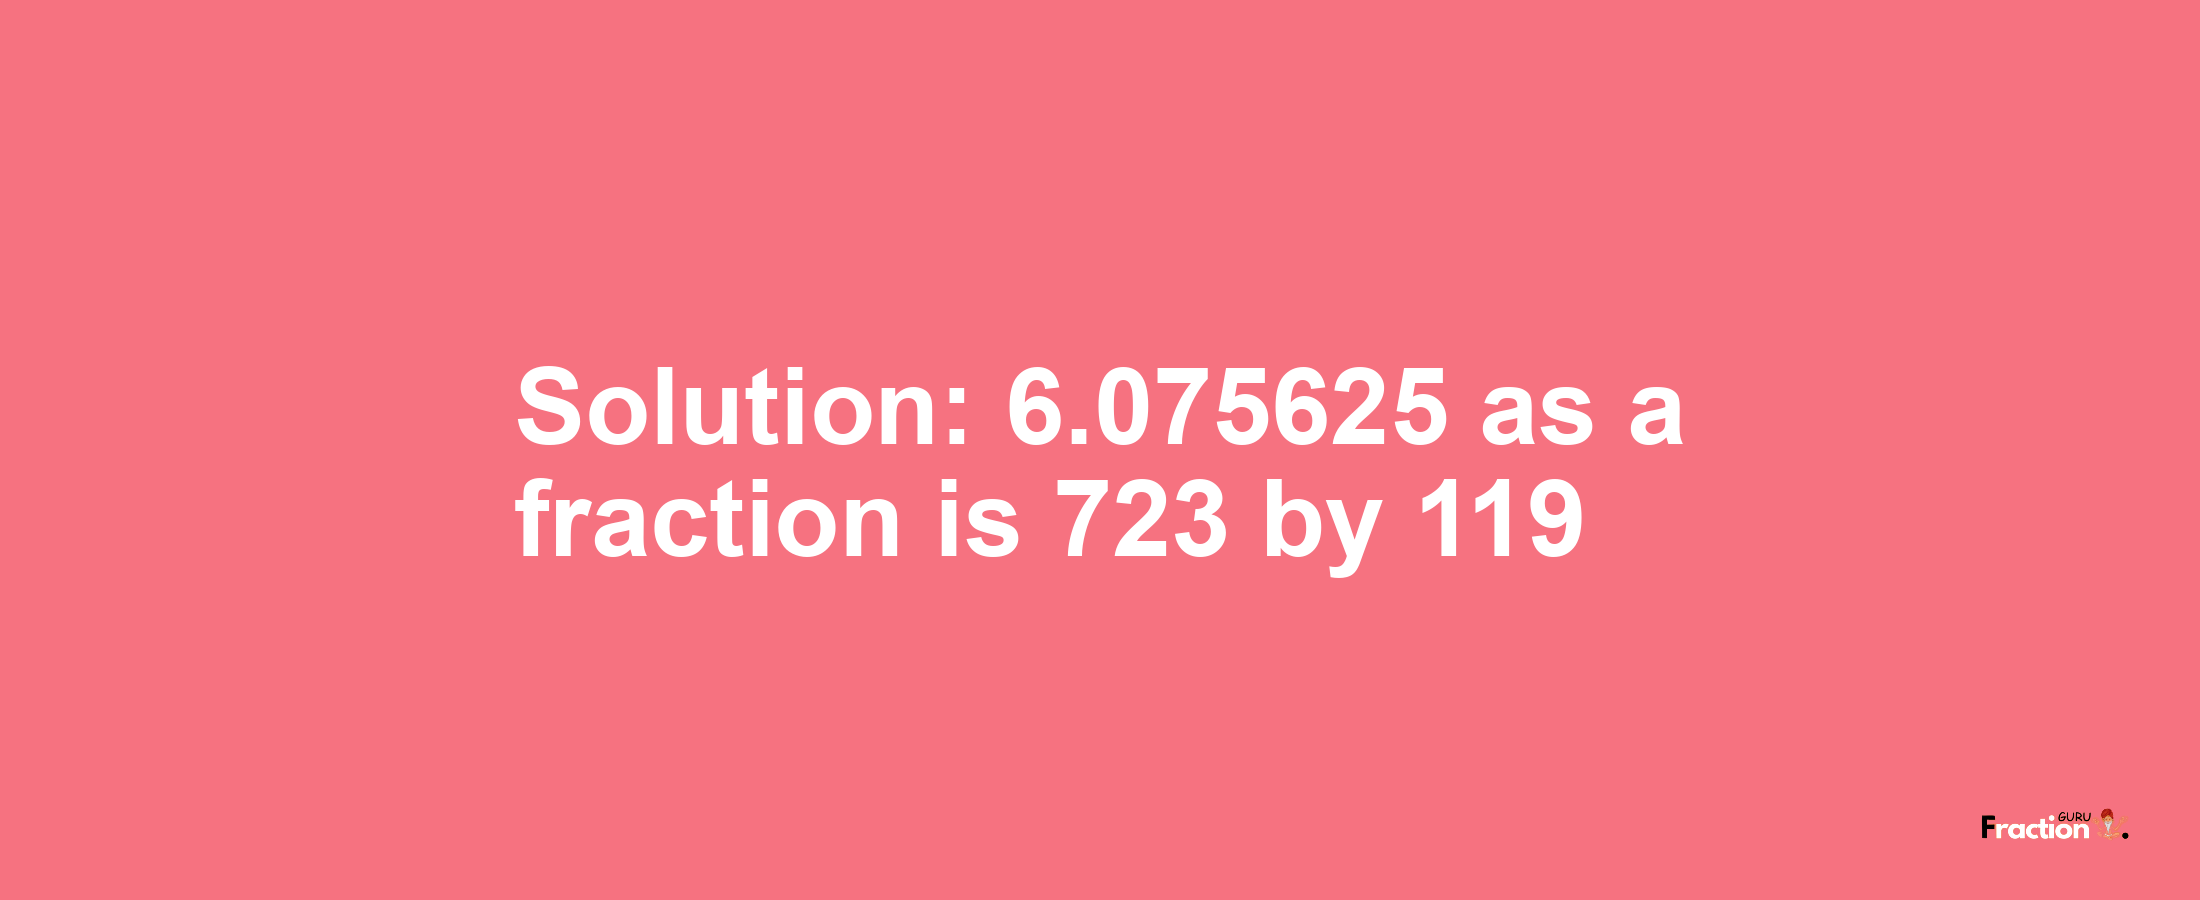 Solution:6.075625 as a fraction is 723/119